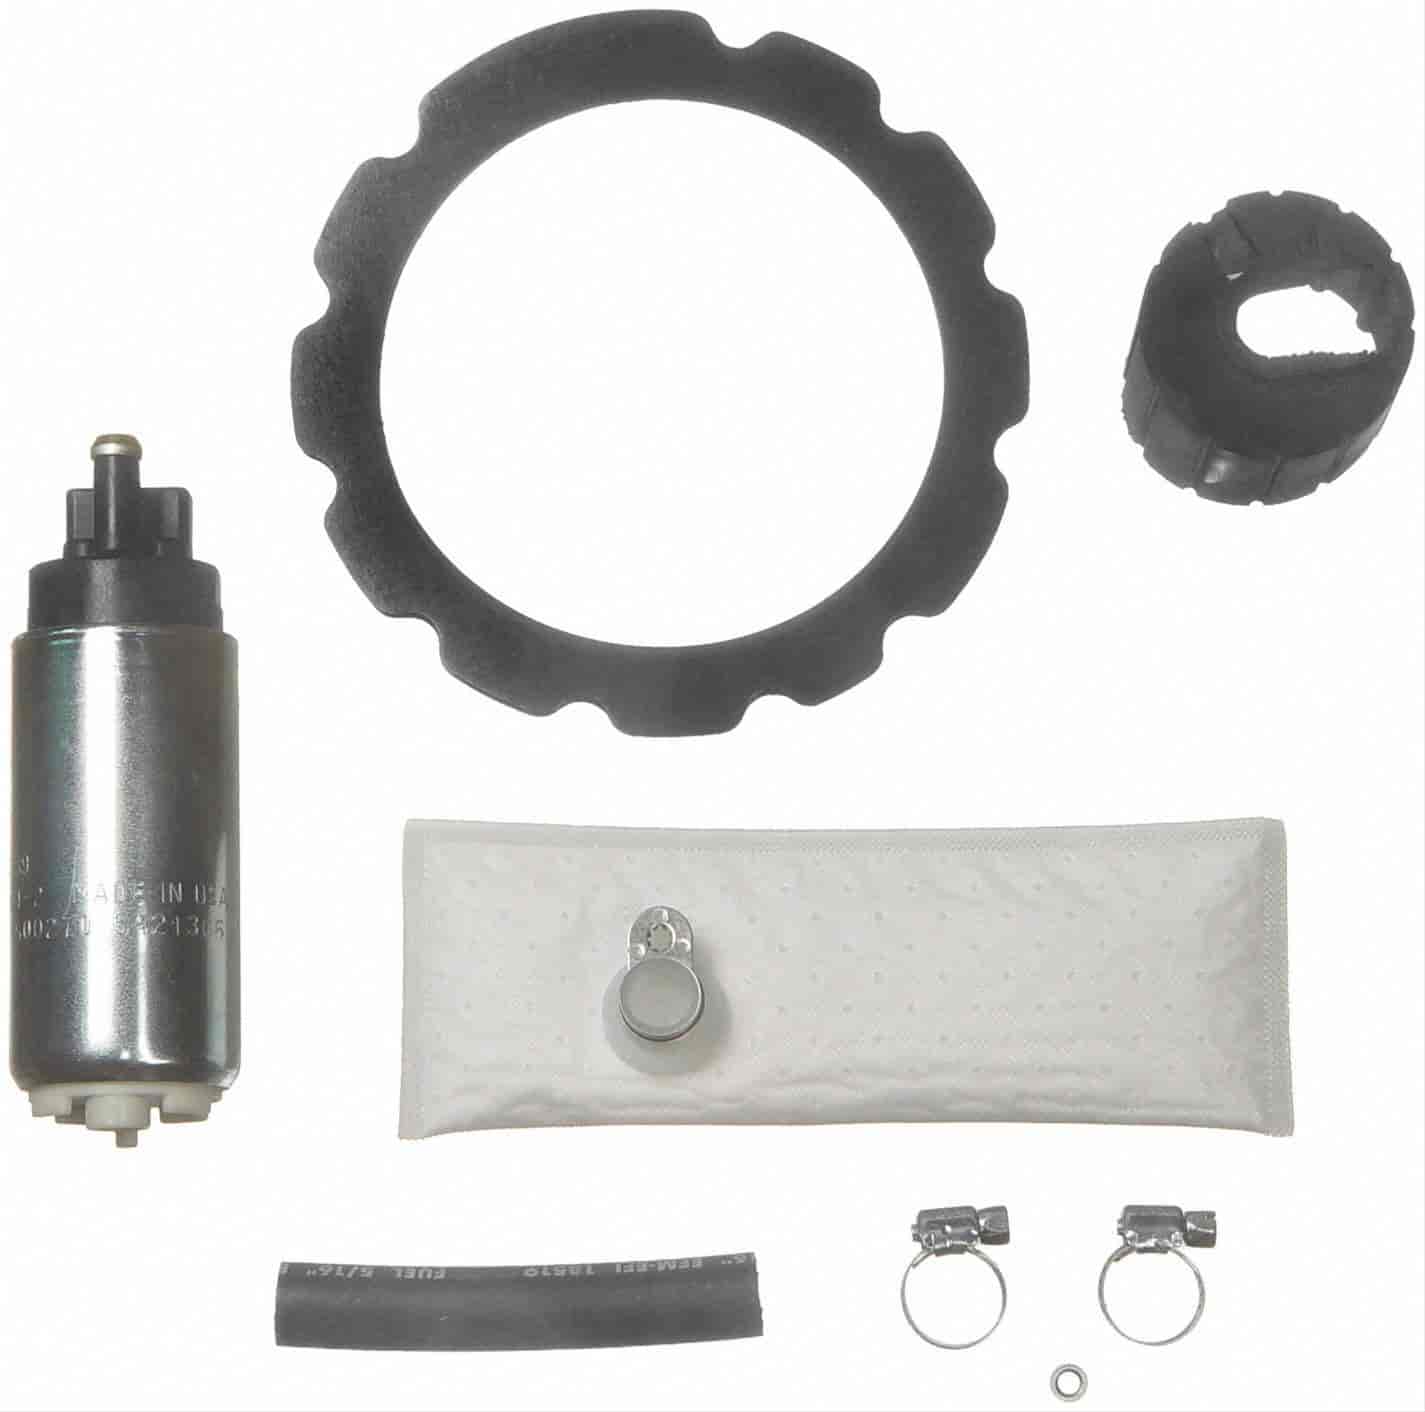 EFI In-Tank Electric Fuel Pump And Strainer Set for 1997-1999 Ford E-150/E-250